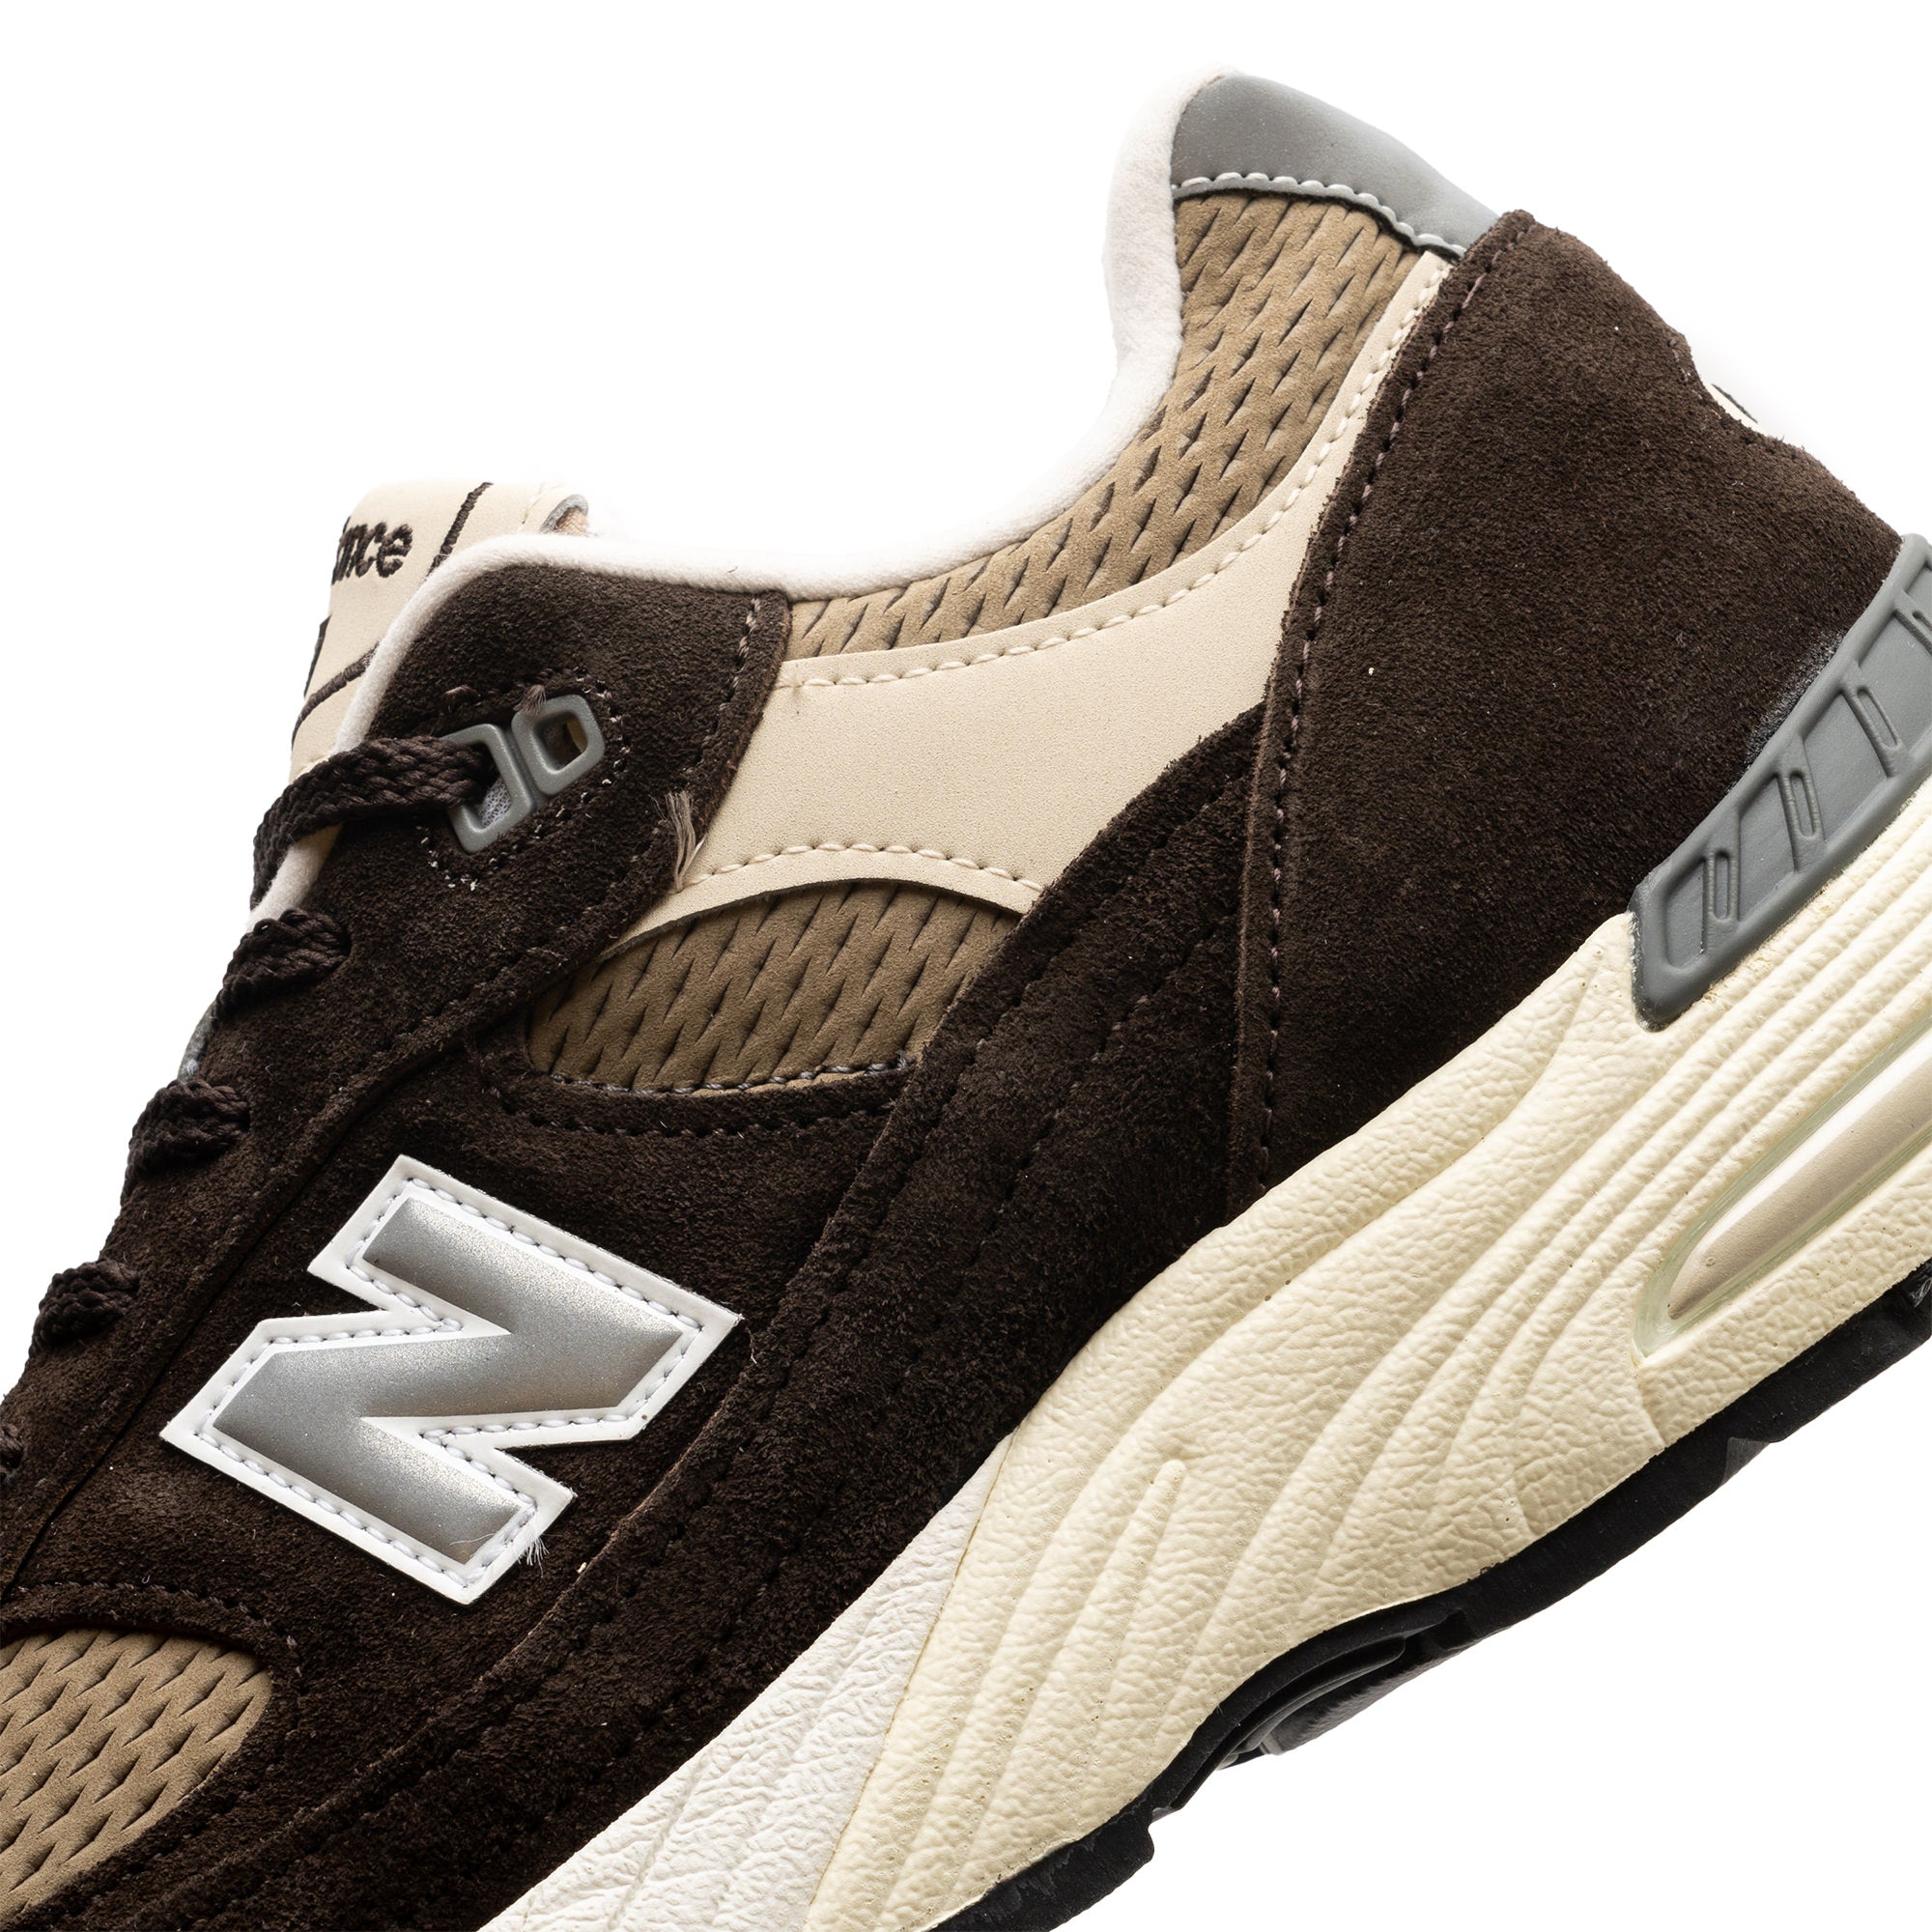 The latest New Balance Women's 696 Re-Engineered expands their women's collection for